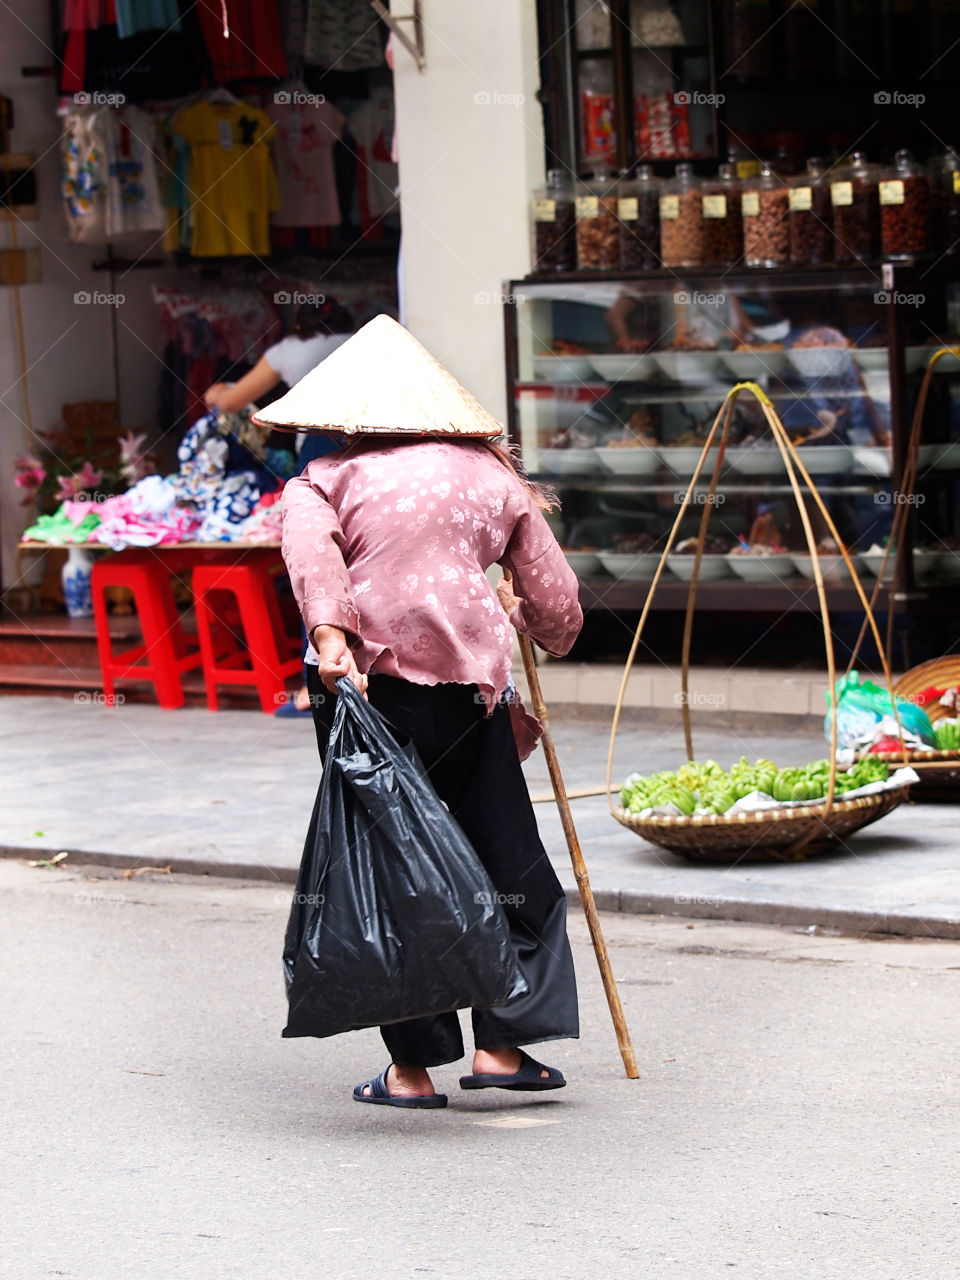 A very old woman in Hanoi streets